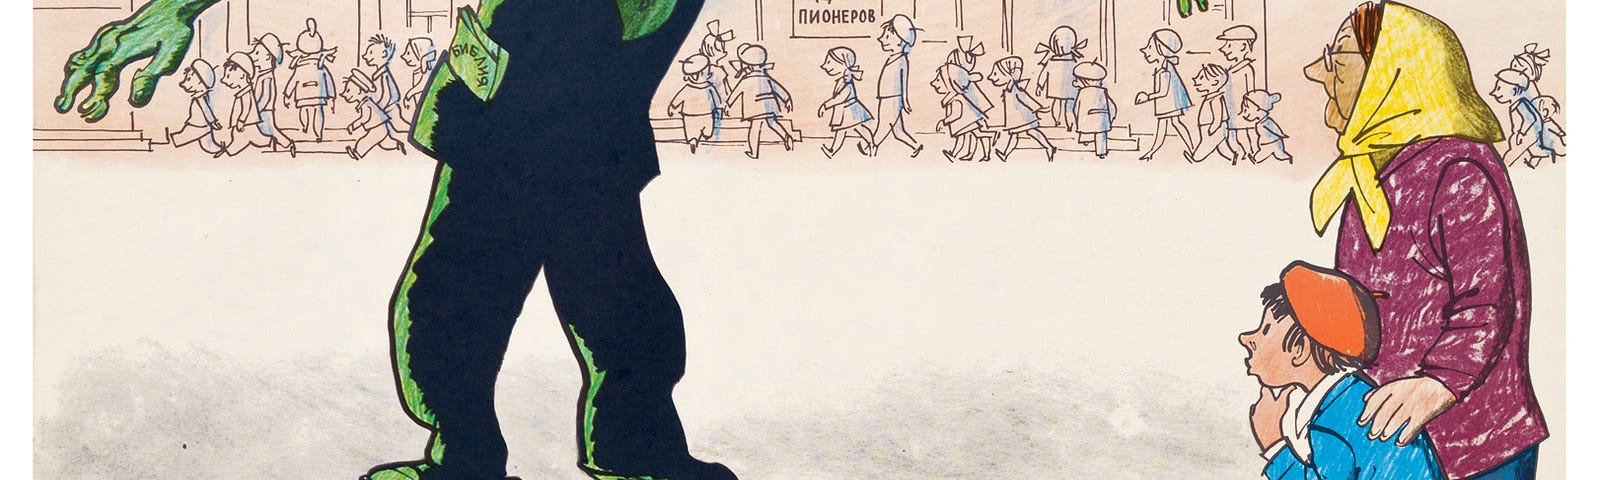 Cartoon of a large green man, whose shadow is shaped like a cross, frigthening a woman and her child.